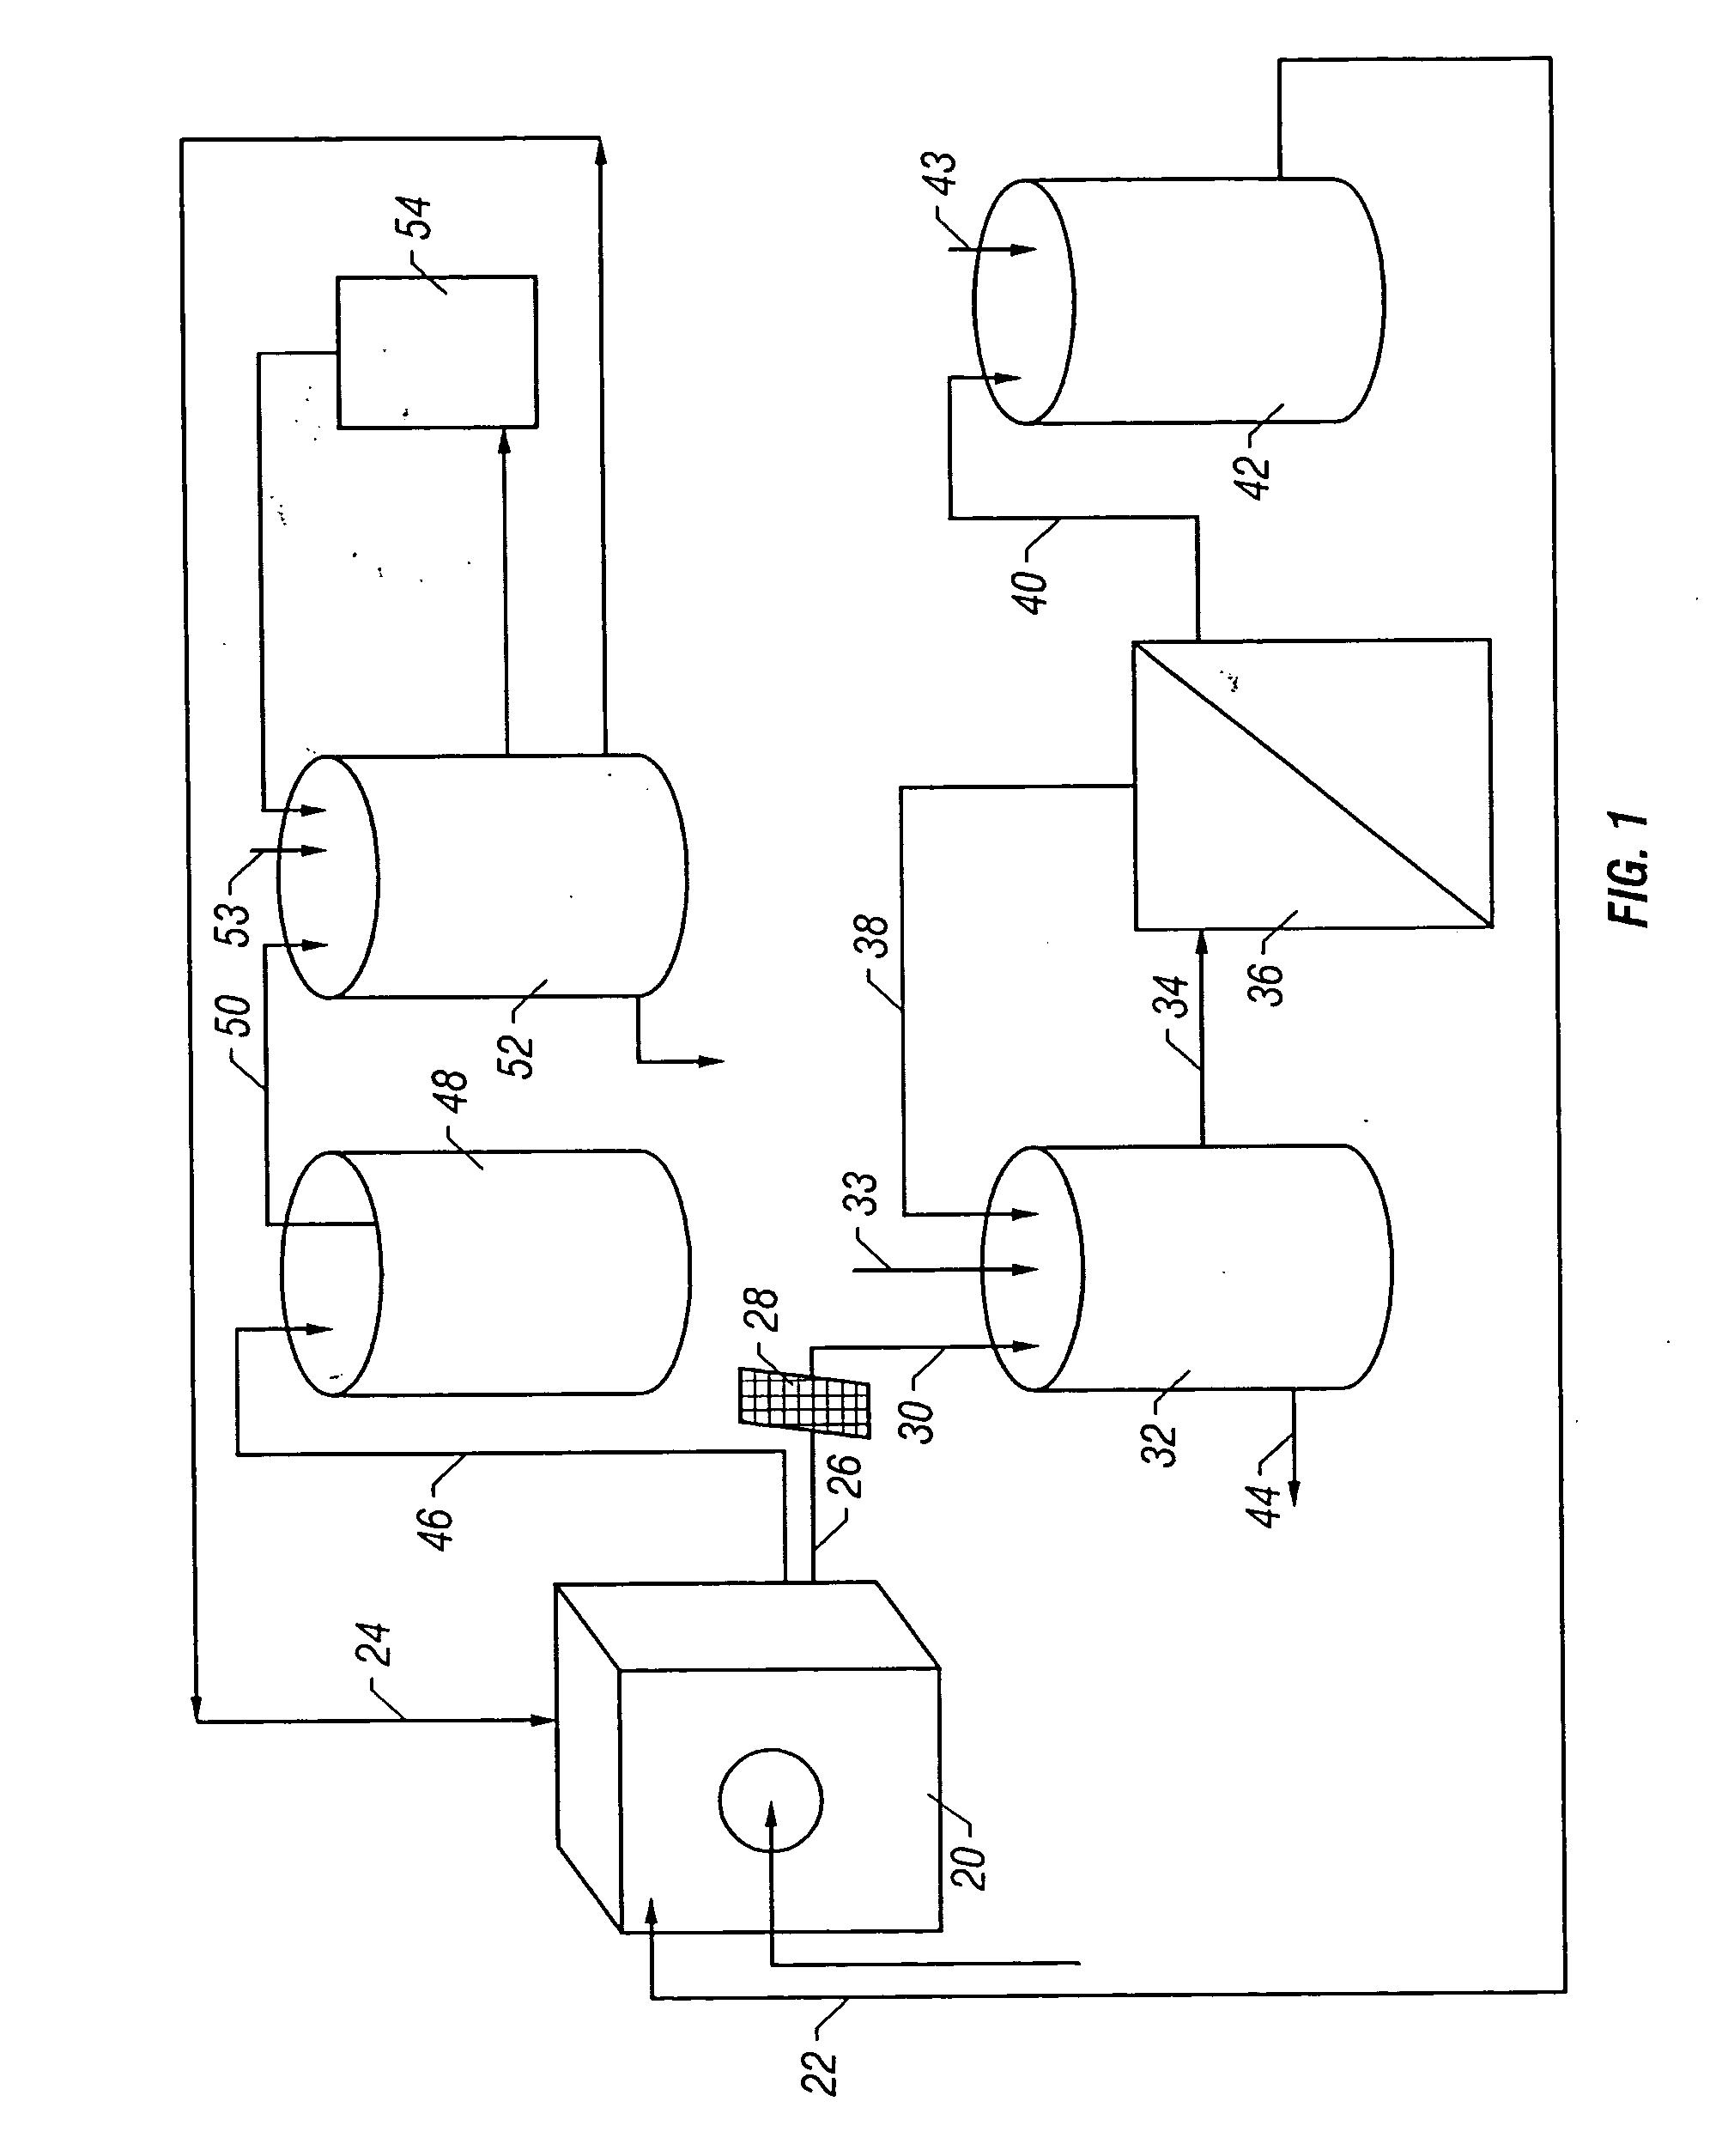 Method for economically viable and environmentally friendly central processing of home laundry